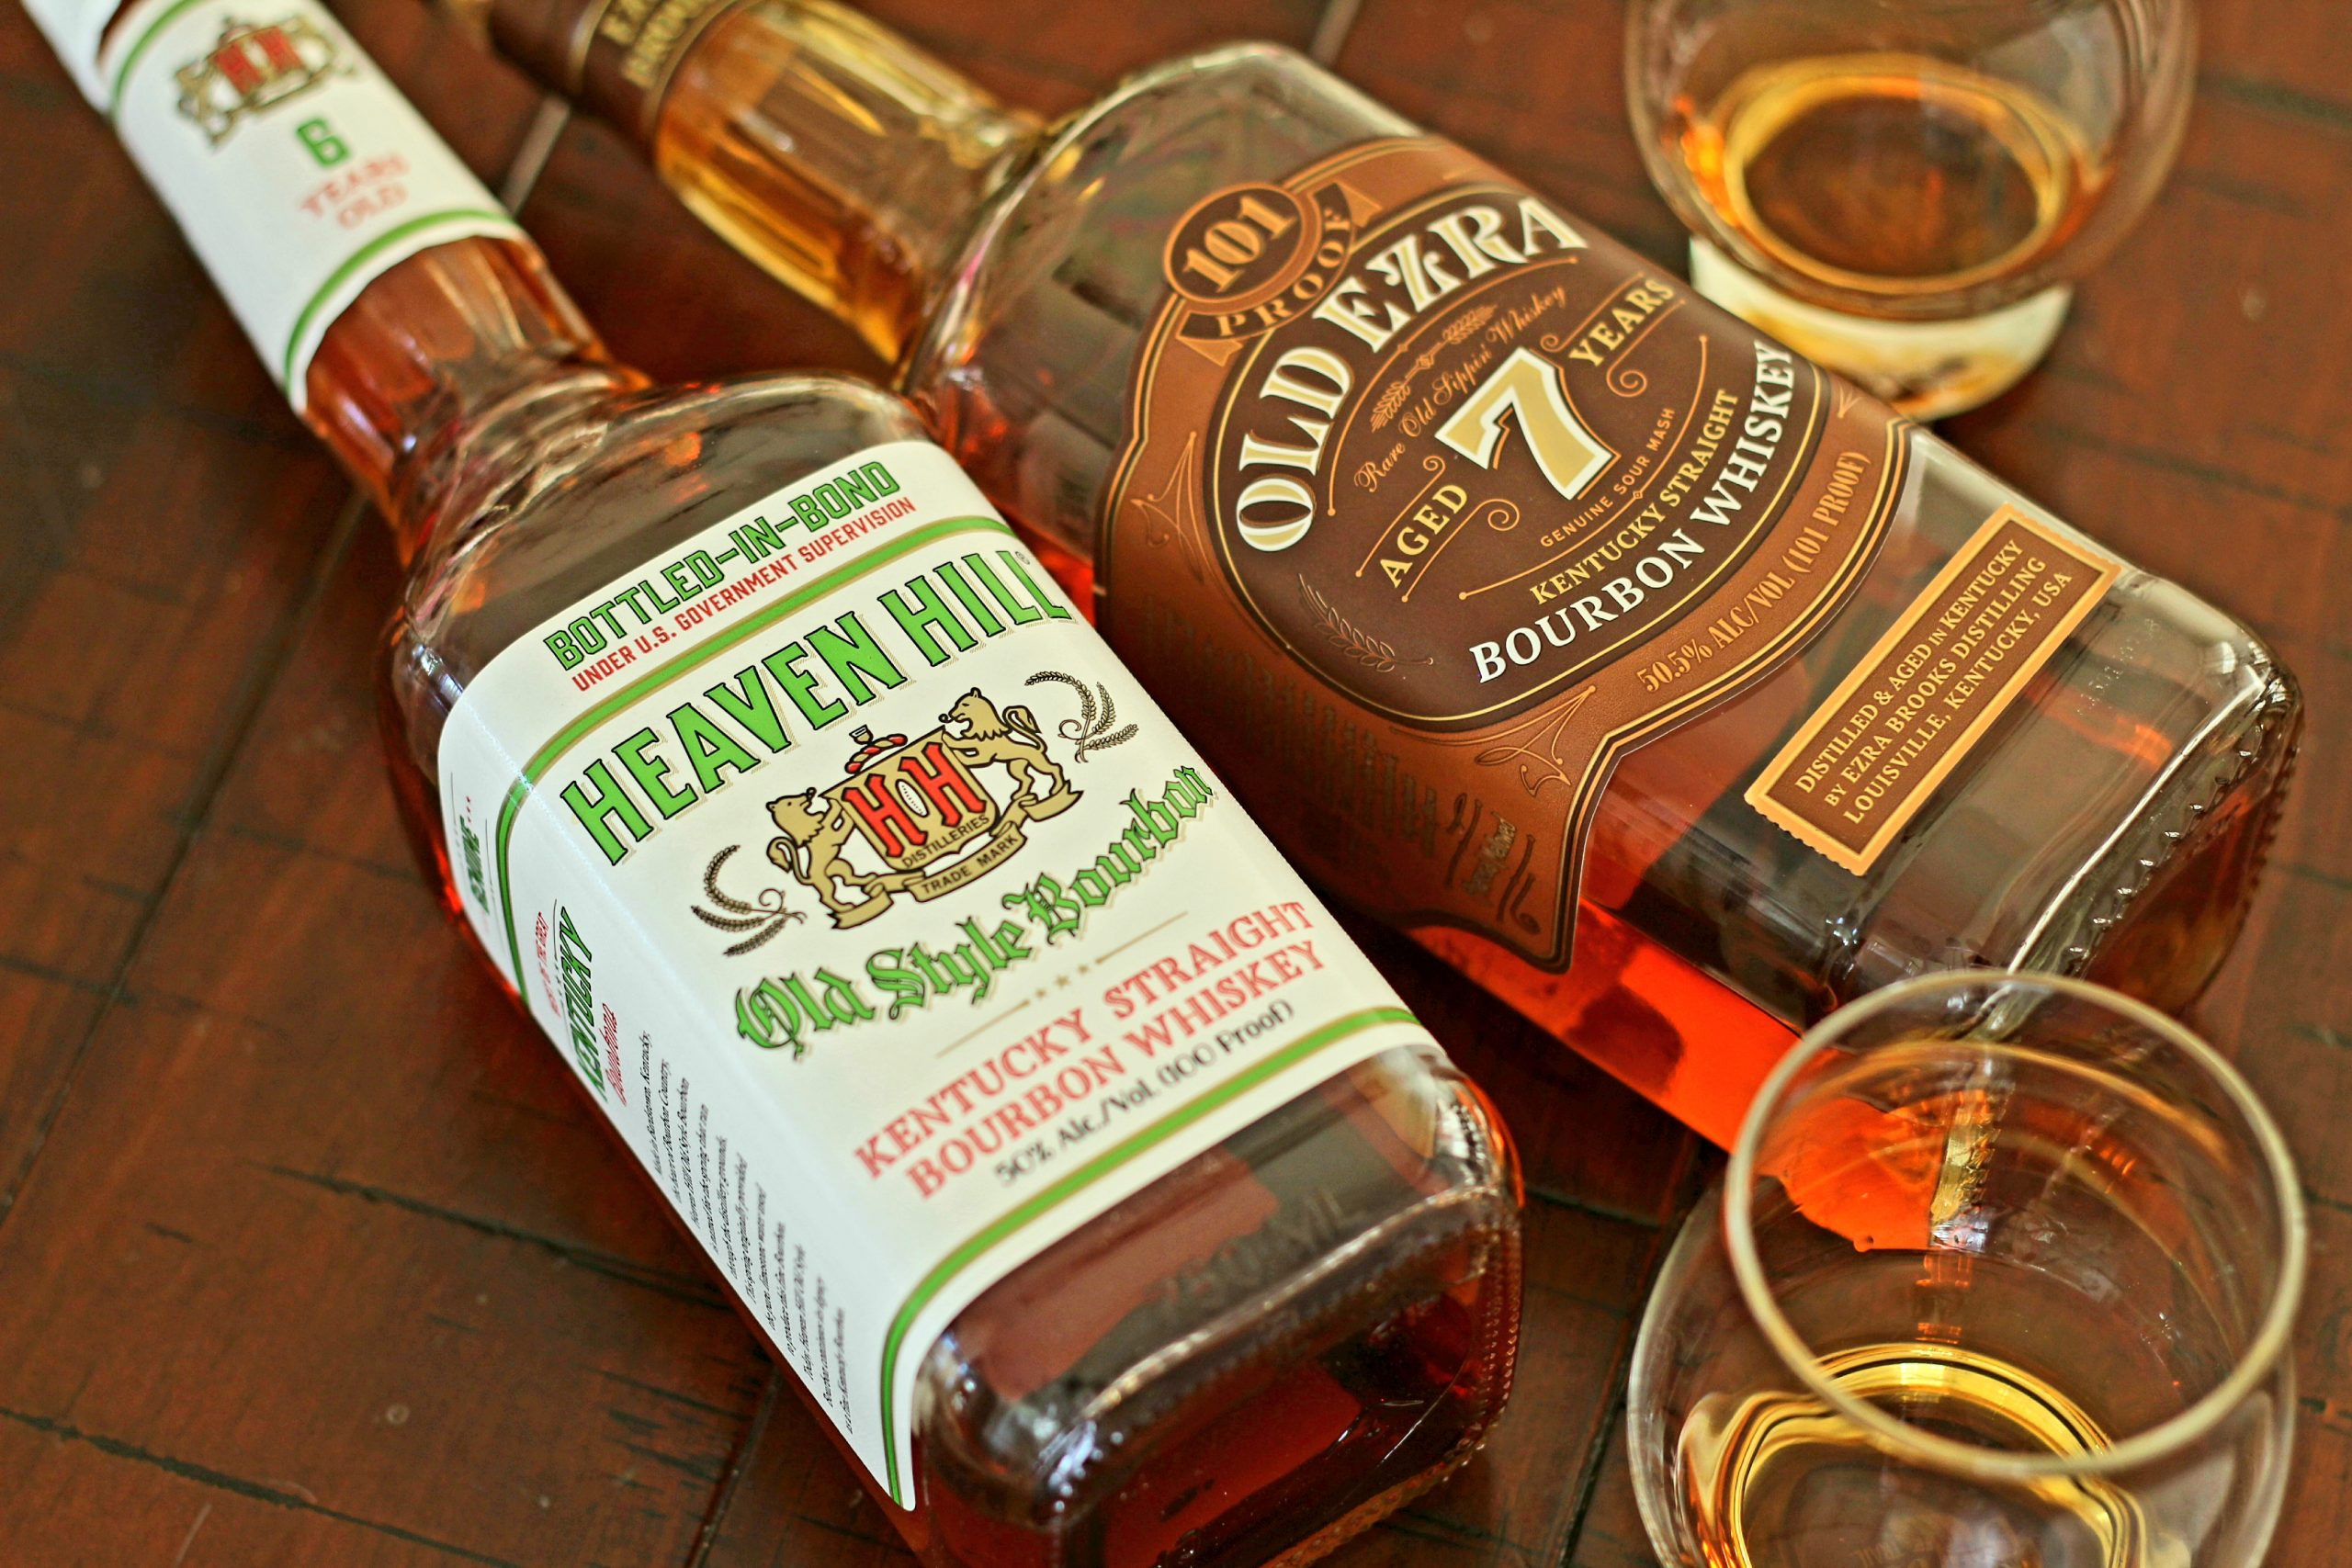 Heaven Hill Bottled in Bond 6 Year vs. Old Ezra 101 7 Year Comparison Review